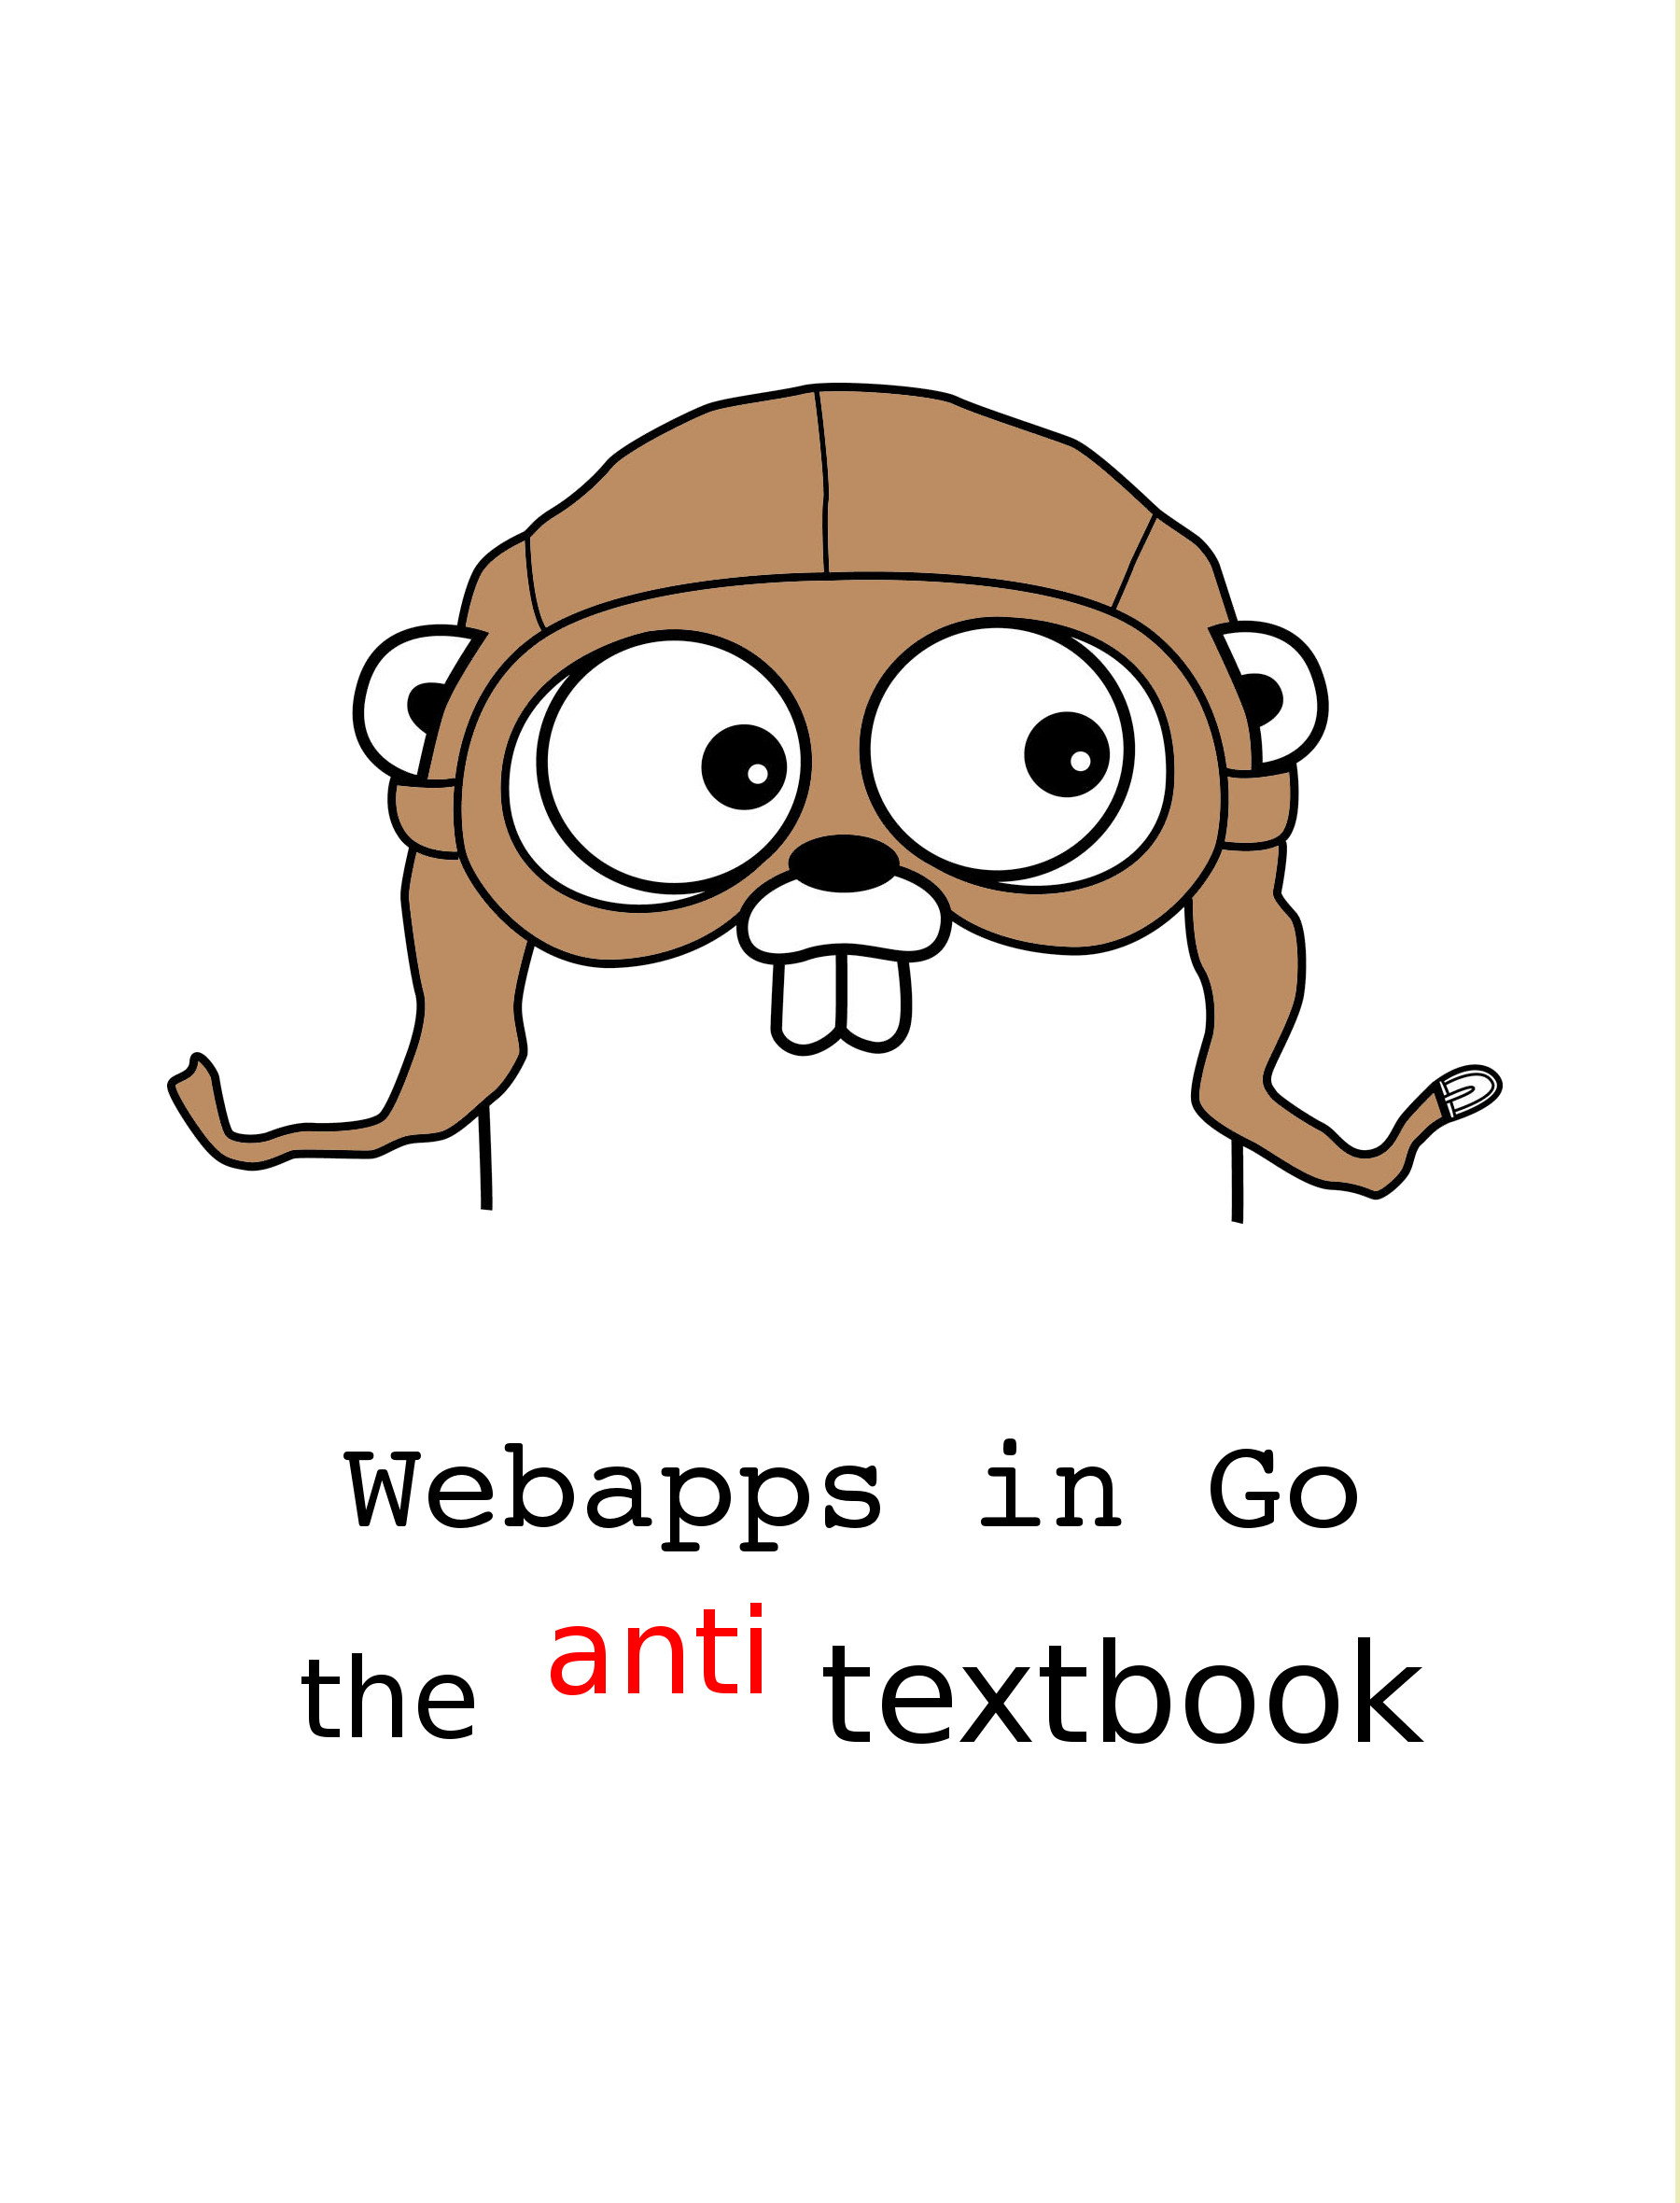 Webapps in Go the anti textbook